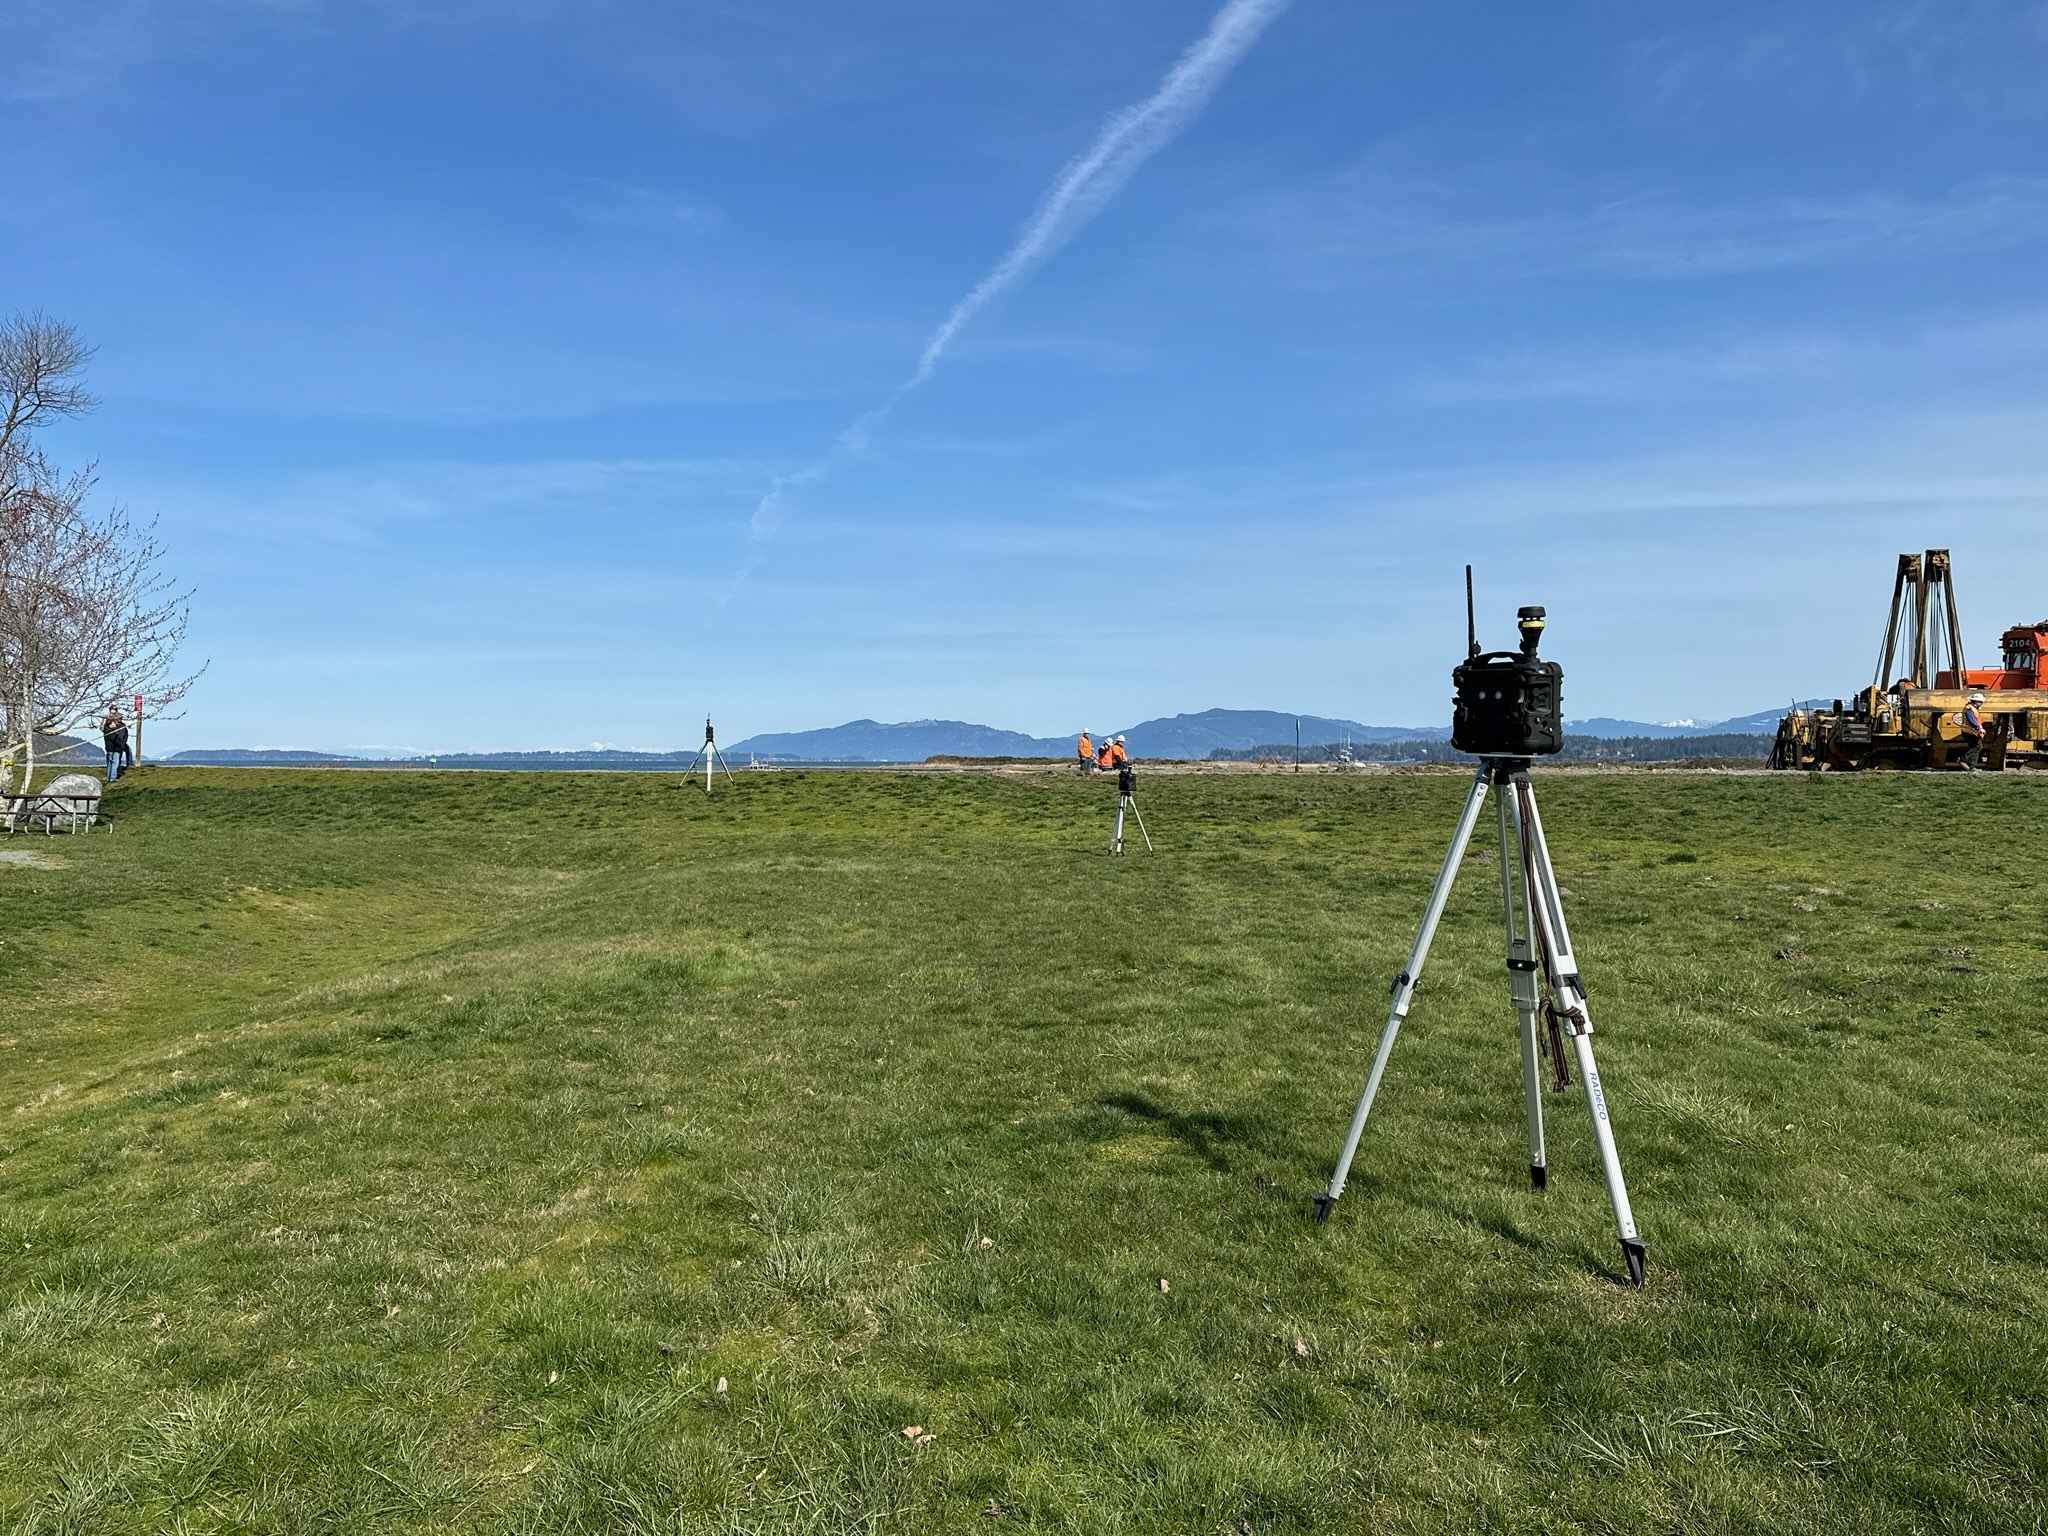 An air quality monitor on a tripod in a field.